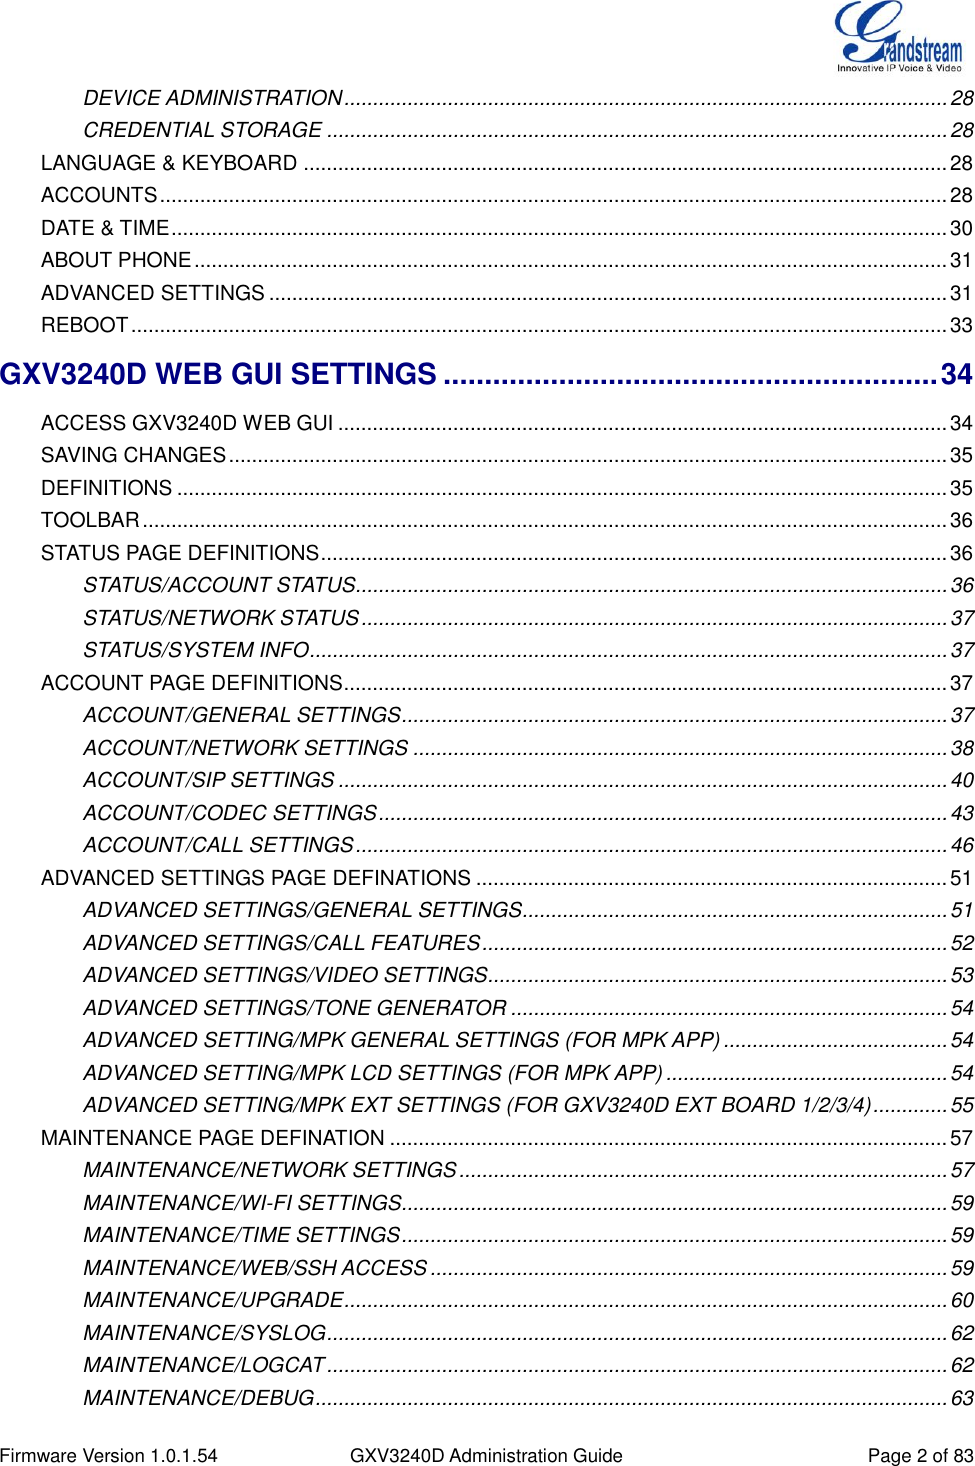  Firmware Version 1.0.1.54 GXV3240D Administration Guide Page 2 of 83  DEVICE ADMINISTRATION ......................................................................................................... 28 CREDENTIAL STORAGE ............................................................................................................ 28 LANGUAGE &amp; KEYBOARD ................................................................................................................ 28 ACCOUNTS ......................................................................................................................................... 28 DATE &amp; TIME ....................................................................................................................................... 30 ABOUT PHONE ................................................................................................................................... 31 ADVANCED SETTINGS ...................................................................................................................... 31 REBOOT .............................................................................................................................................. 33 GXV3240D WEB GUI SETTINGS ............................................................ 34 ACCESS GXV3240D WEB GUI .......................................................................................................... 34 SAVING CHANGES ............................................................................................................................. 35 DEFINITIONS ...................................................................................................................................... 35 TOOLBAR ............................................................................................................................................ 36 STATUS PAGE DEFINITIONS ............................................................................................................. 36 STATUS/ACCOUNT STATUS....................................................................................................... 36 STATUS/NETWORK STATUS ...................................................................................................... 37 STATUS/SYSTEM INFO ............................................................................................................... 37 ACCOUNT PAGE DEFINITIONS ......................................................................................................... 37 ACCOUNT/GENERAL SETTINGS ............................................................................................... 37 ACCOUNT/NETWORK SETTINGS ............................................................................................. 38 ACCOUNT/SIP SETTINGS .......................................................................................................... 40 ACCOUNT/CODEC SETTINGS ................................................................................................... 43 ACCOUNT/CALL SETTINGS ....................................................................................................... 46 ADVANCED SETTINGS PAGE DEFINATIONS .................................................................................. 51 ADVANCED SETTINGS/GENERAL SETTINGS.......................................................................... 51 ADVANCED SETTINGS/CALL FEATURES ................................................................................. 52 ADVANCED SETTINGS/VIDEO SETTINGS................................................................................ 53 ADVANCED SETTINGS/TONE GENERATOR ............................................................................ 54 ADVANCED SETTING/MPK GENERAL SETTINGS (FOR MPK APP) ....................................... 54 ADVANCED SETTING/MPK LCD SETTINGS (FOR MPK APP) ................................................. 54 ADVANCED SETTING/MPK EXT SETTINGS (FOR GXV3240D EXT BOARD 1/2/3/4) ............. 55 MAINTENANCE PAGE DEFINATION ................................................................................................. 57 MAINTENANCE/NETWORK SETTINGS ..................................................................................... 57 MAINTENANCE/WI-FI SETTINGS ............................................................................................... 59 MAINTENANCE/TIME SETTINGS ............................................................................................... 59 MAINTENANCE/WEB/SSH ACCESS .......................................................................................... 59 MAINTENANCE/UPGRADE ......................................................................................................... 60 MAINTENANCE/SYSLOG ............................................................................................................ 62 MAINTENANCE/LOGCAT ............................................................................................................ 62 MAINTENANCE/DEBUG .............................................................................................................. 63 